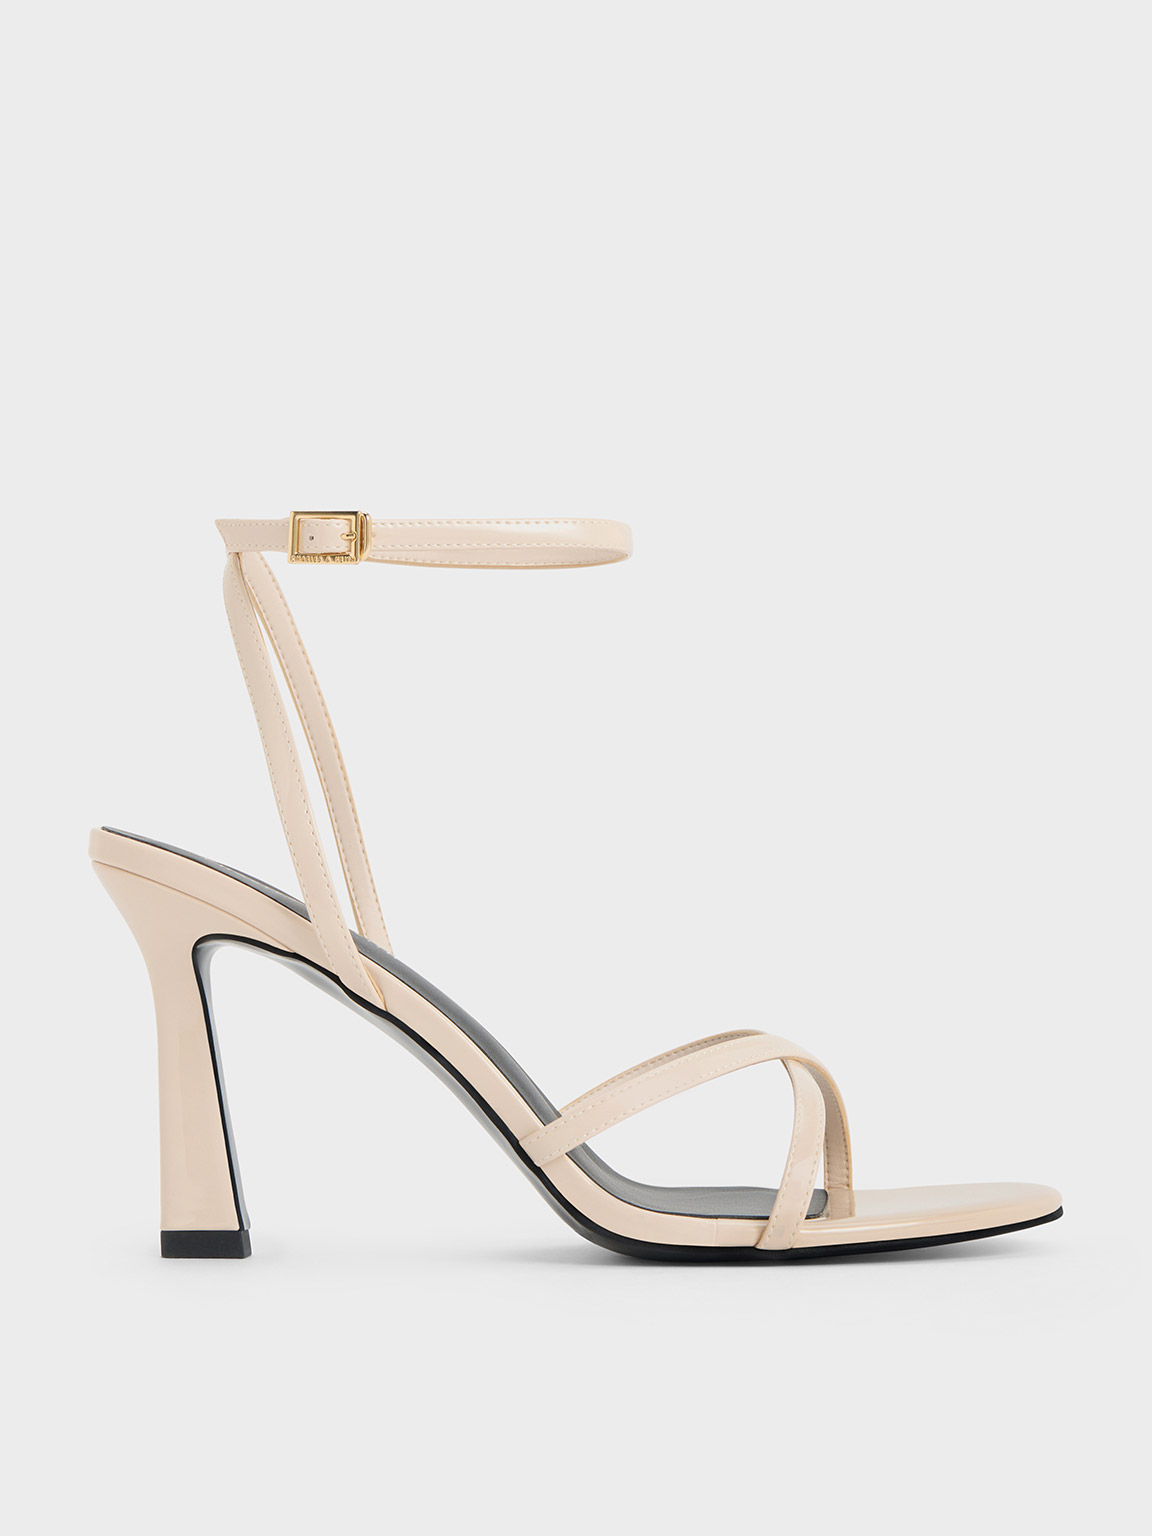 Cream Patent Crossover-Strap Heeled Sandals - CHARLES & KEITH UK